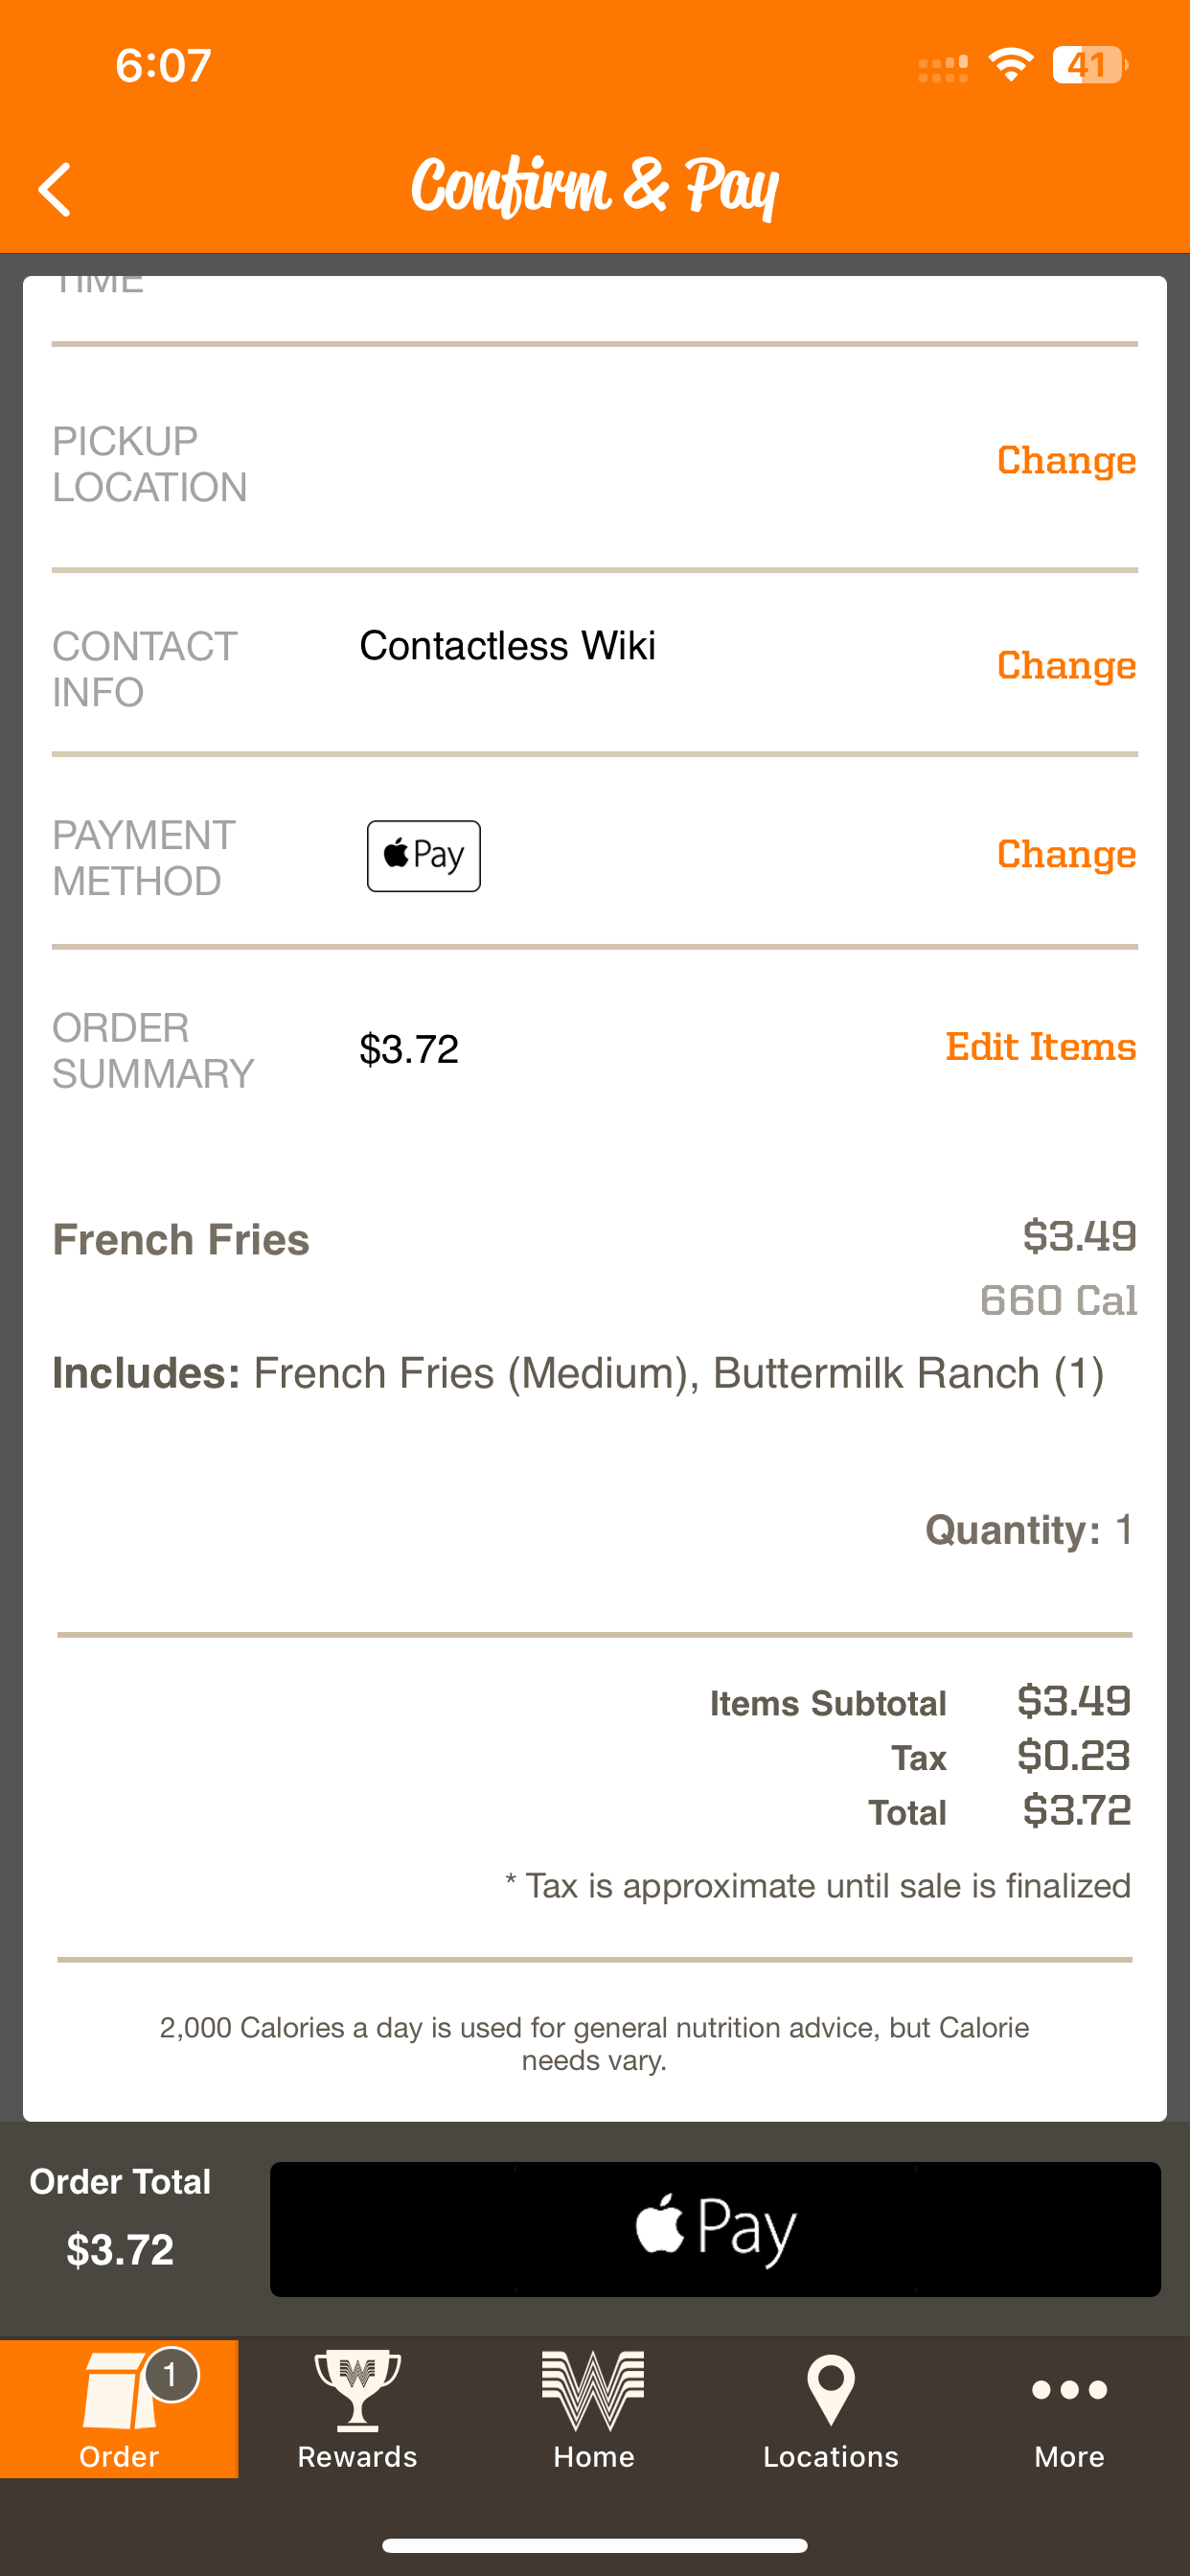 Whataburger accepts Apple Pay in its iOS app.